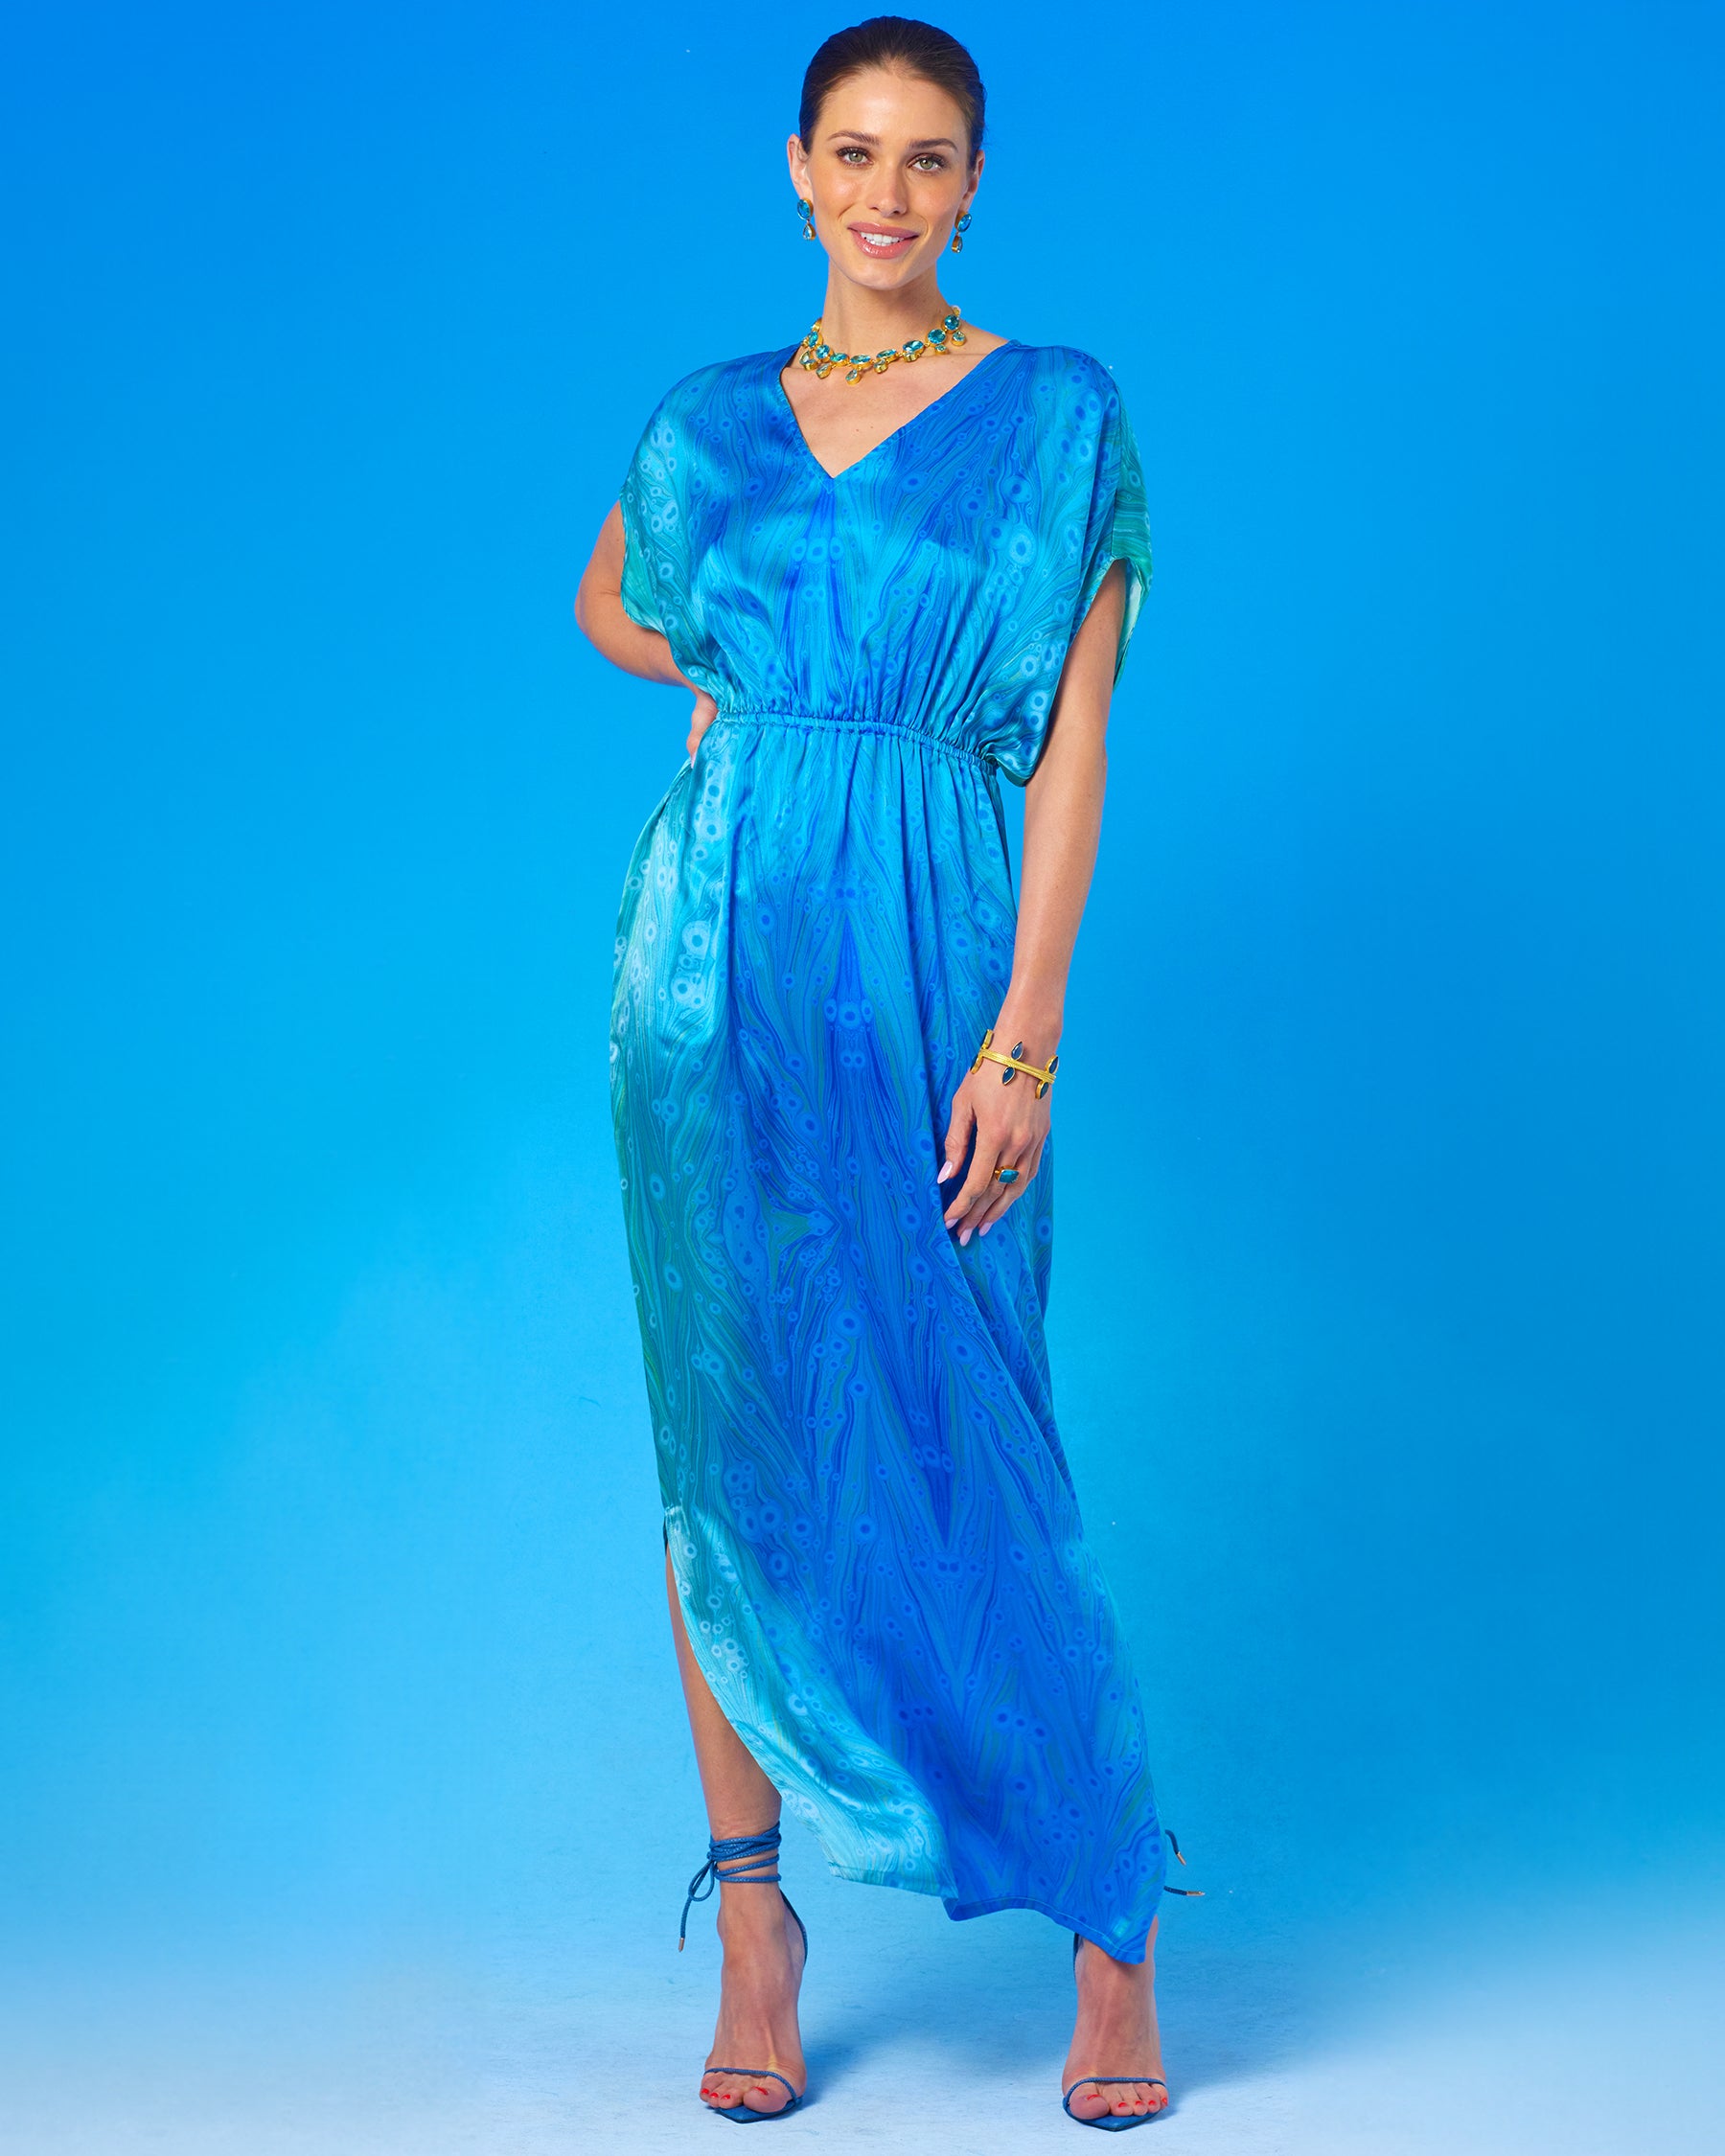 Calliope Long Silk Dress in Sea Nymph Blues front view